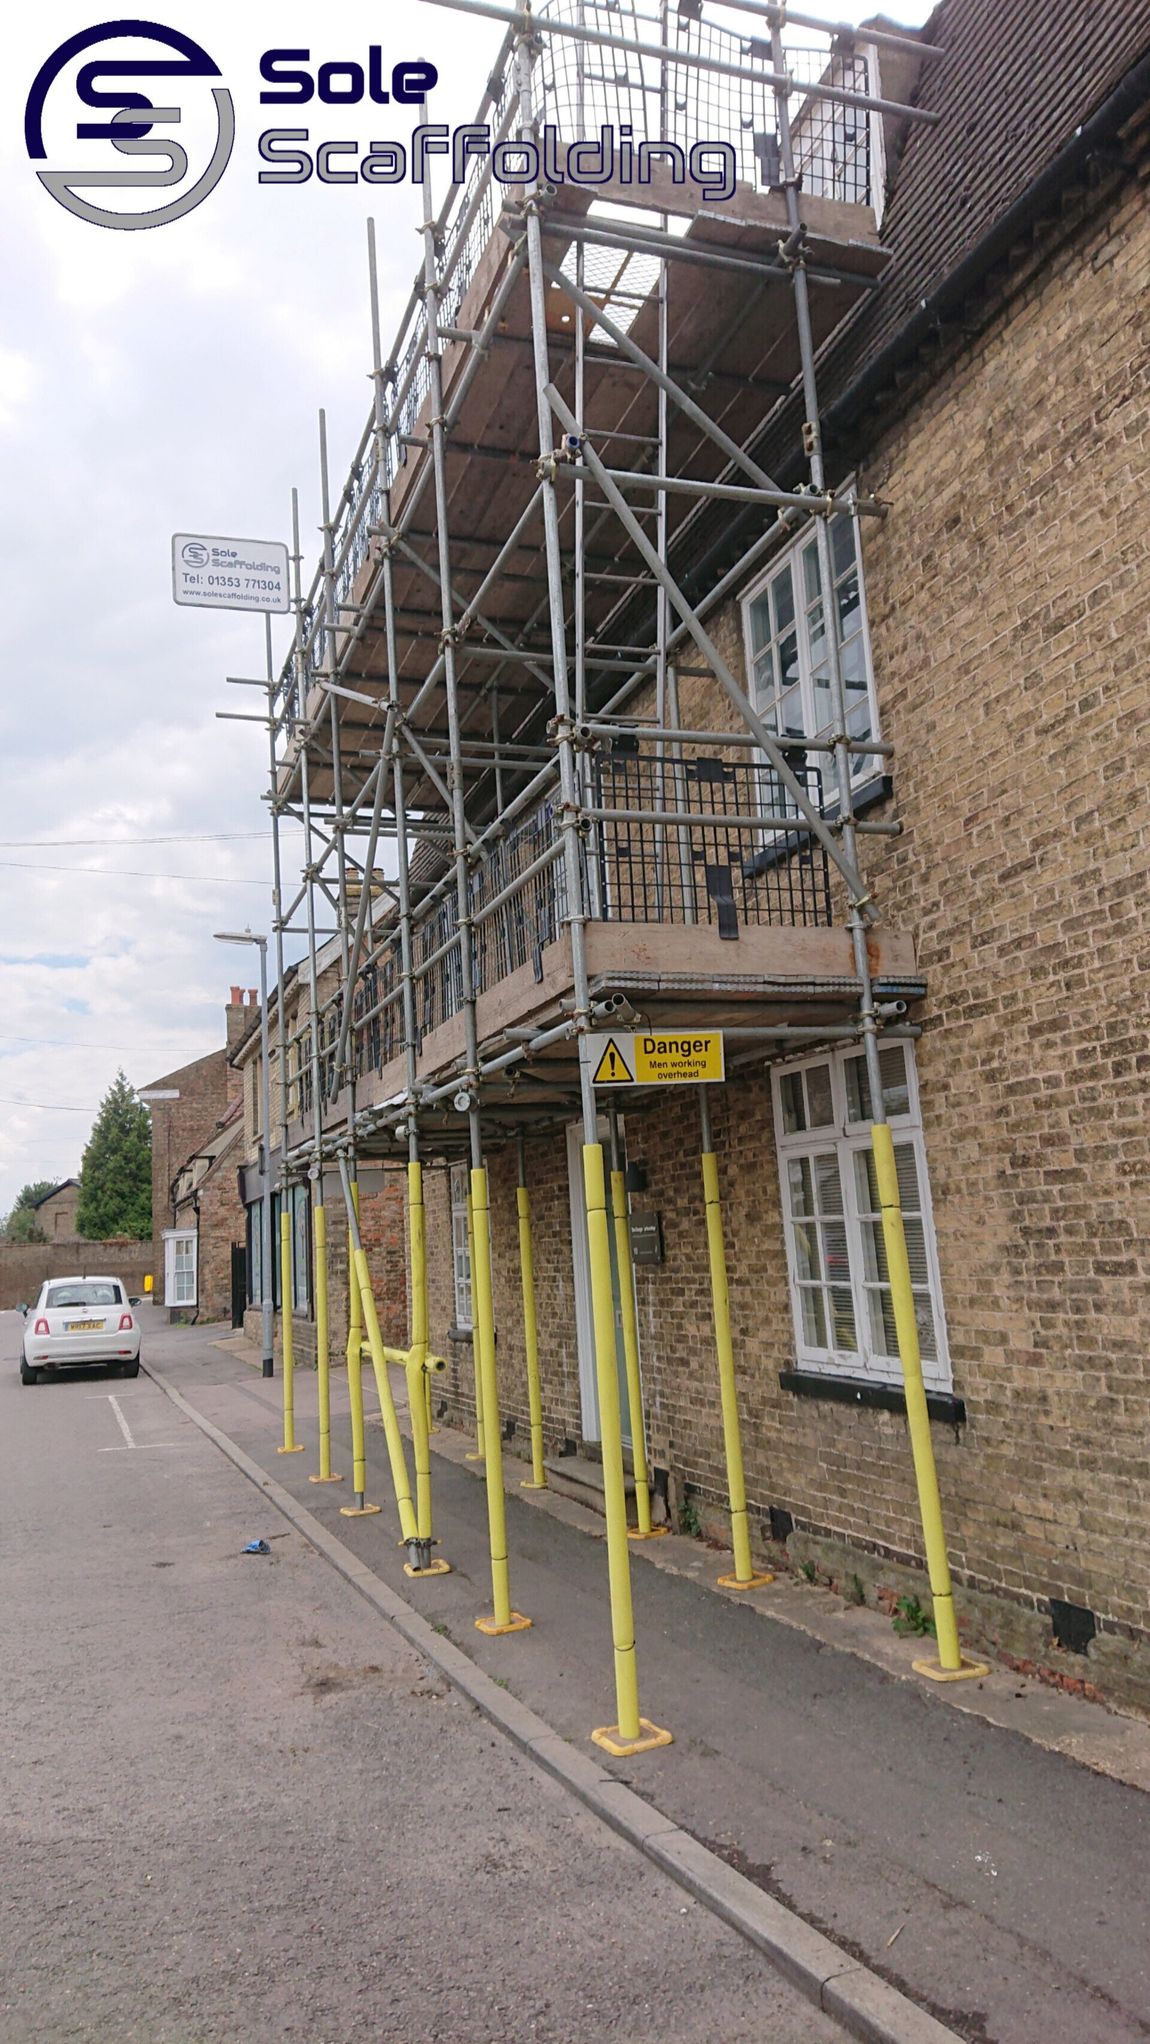 sole scaffolding - scaffold for  window replacement in Charteris